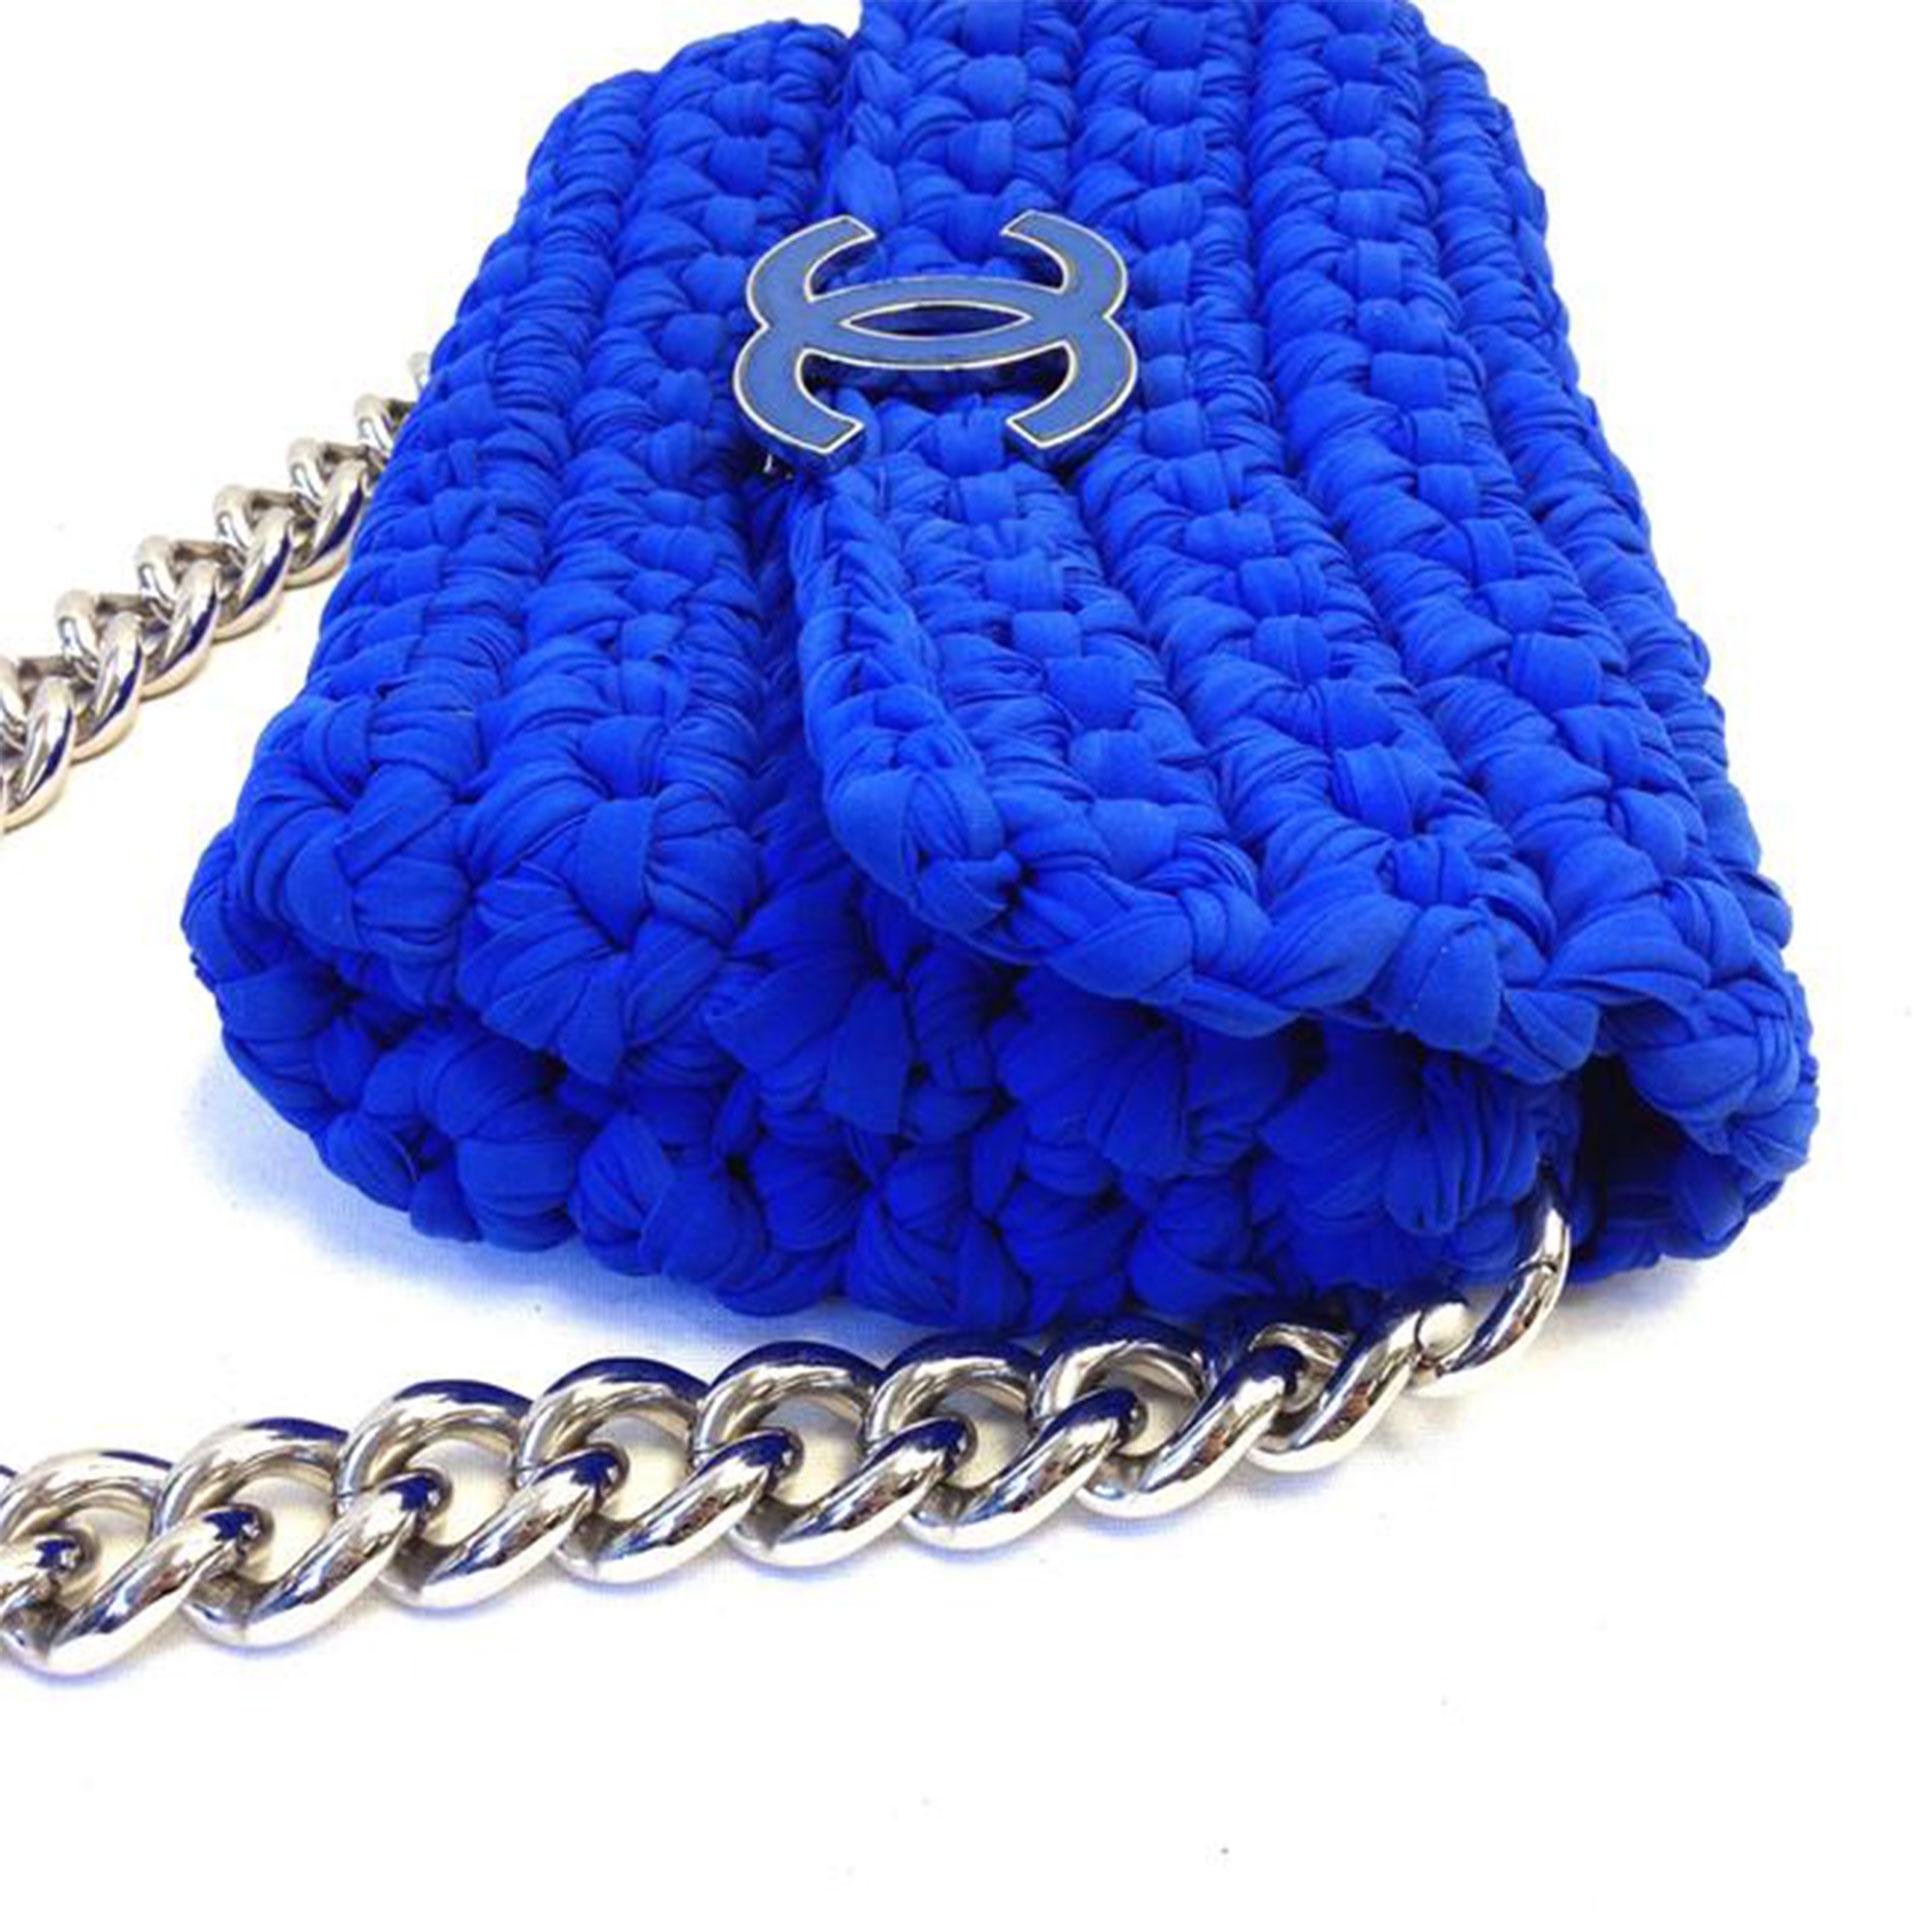 Chanel Classic Flap Electric Crochet Collectors Blue Cloth Shoulder Bag In Good Condition For Sale In Miami, FL